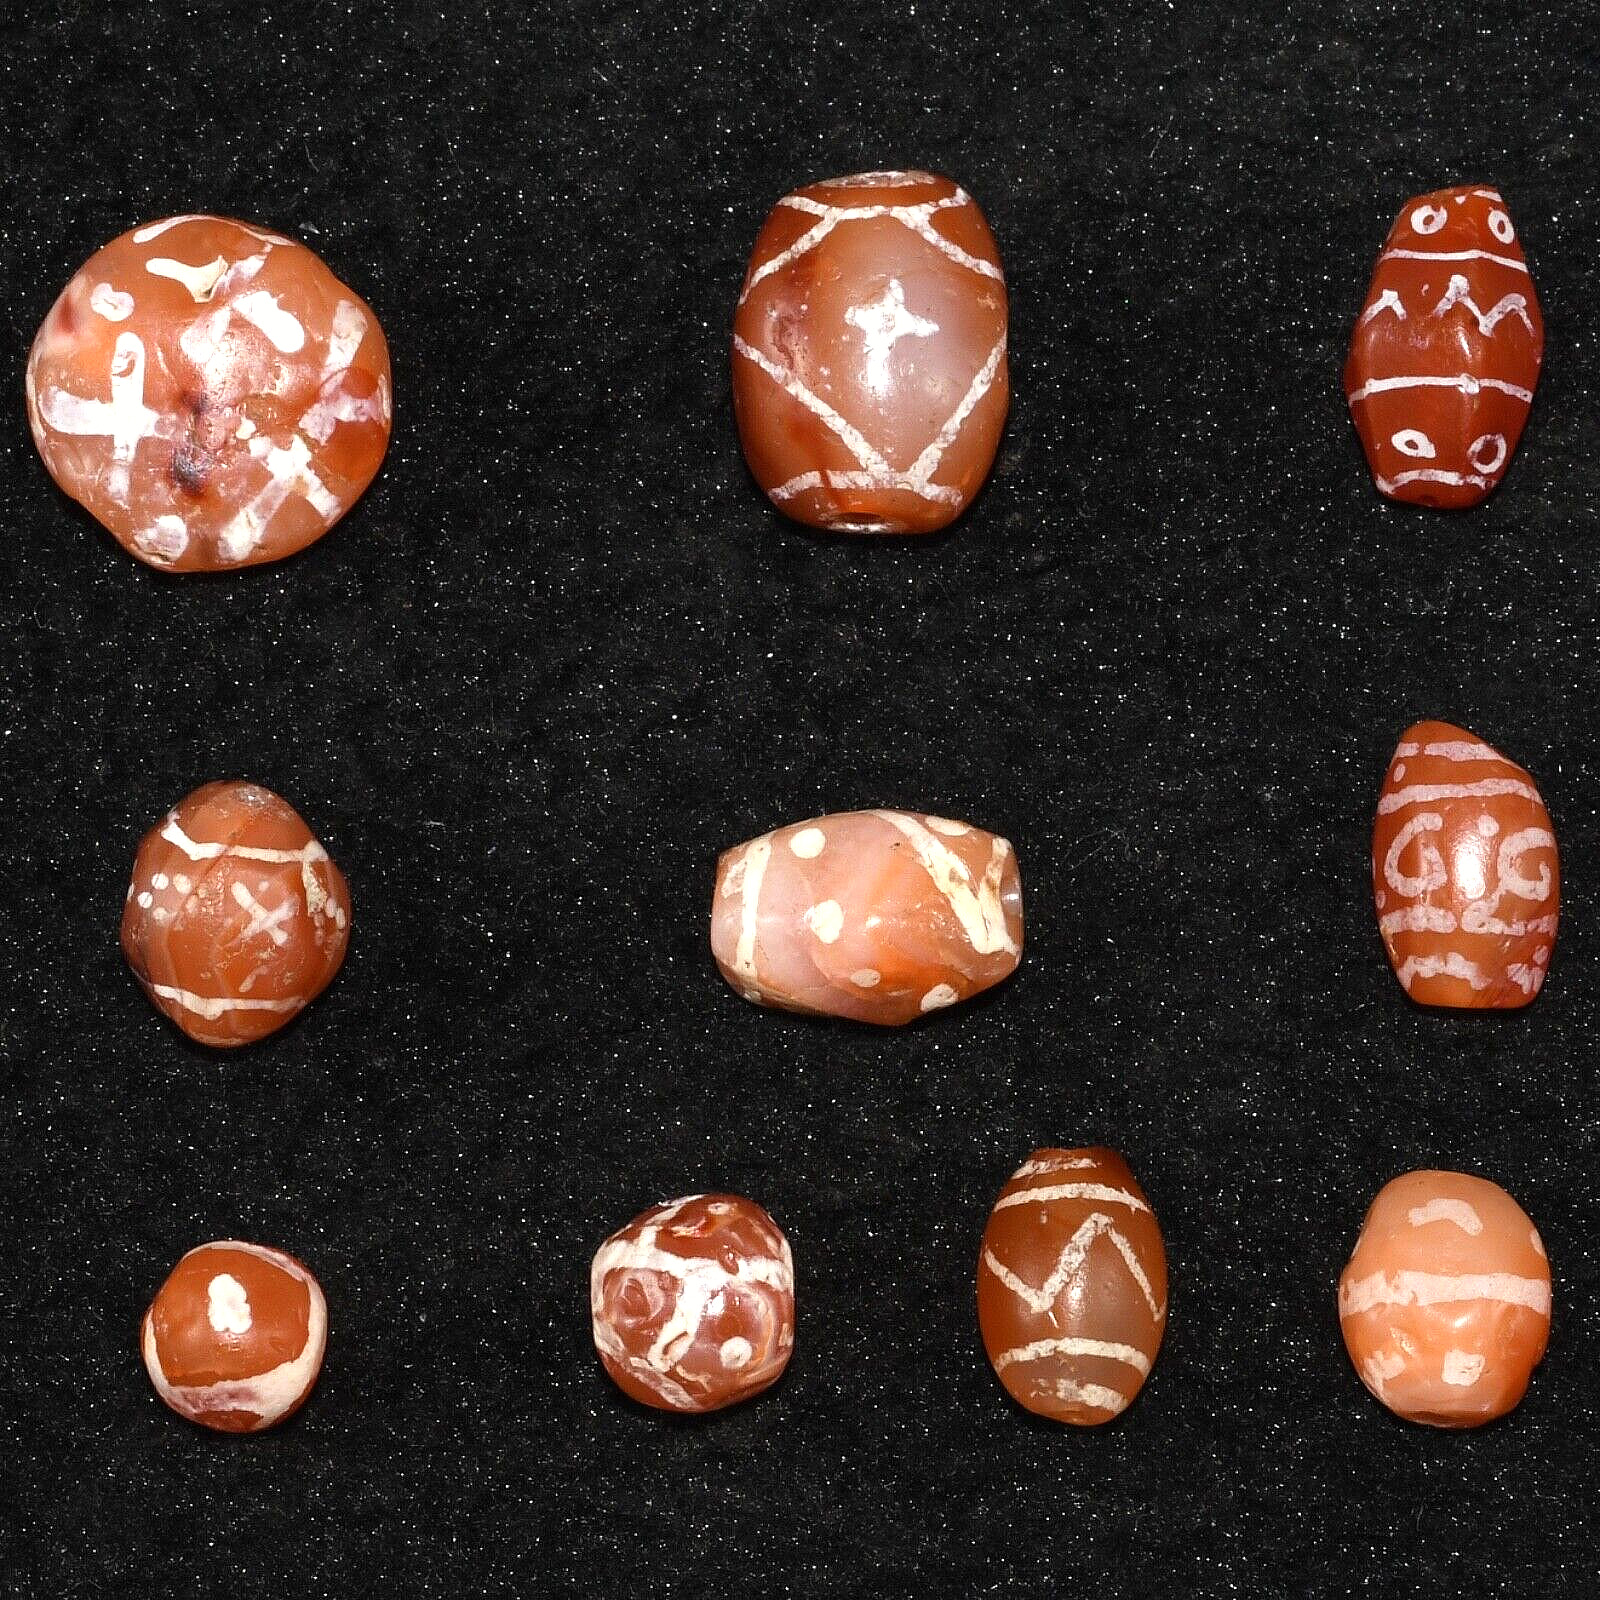 10 Large Ancient Etched Carnelian Beads in Good Condition Over 2000 Years Old